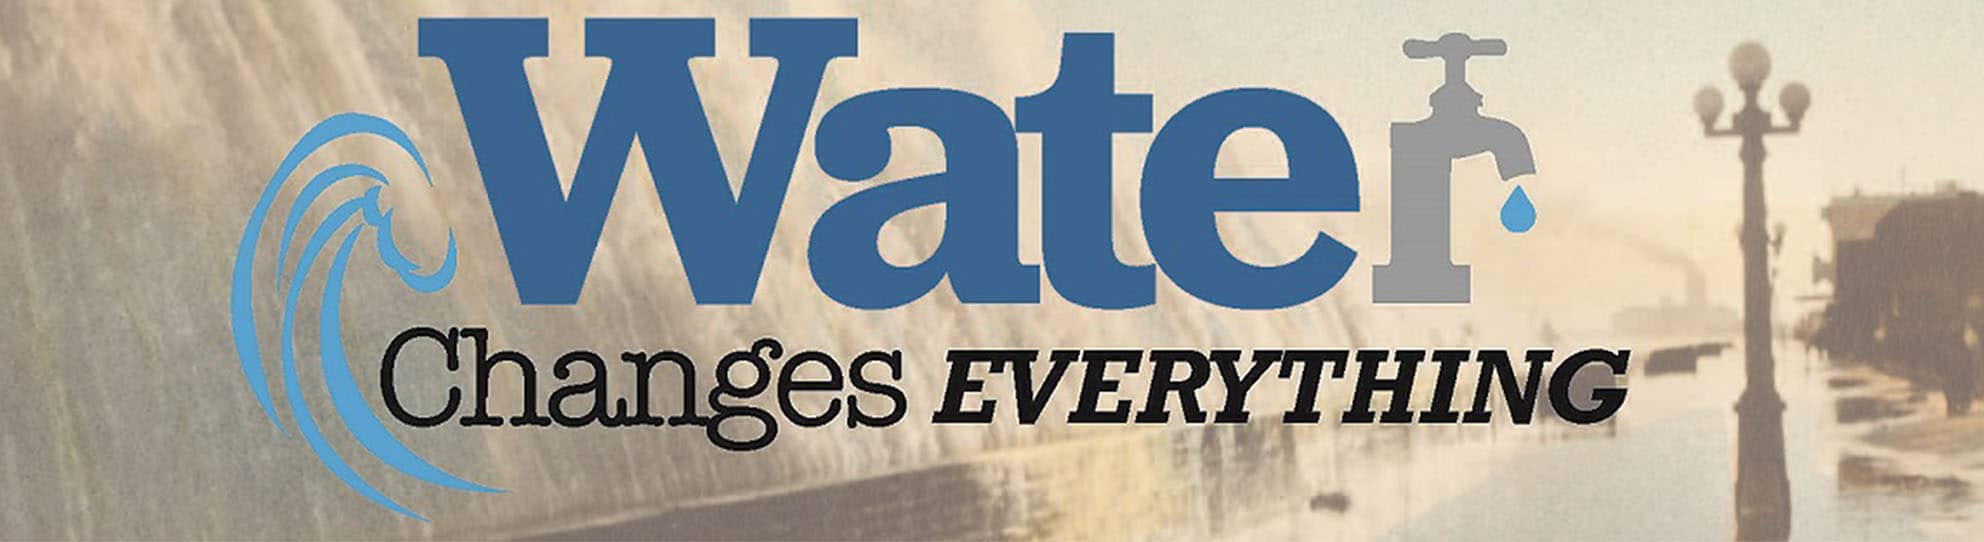 Water changes everything banner